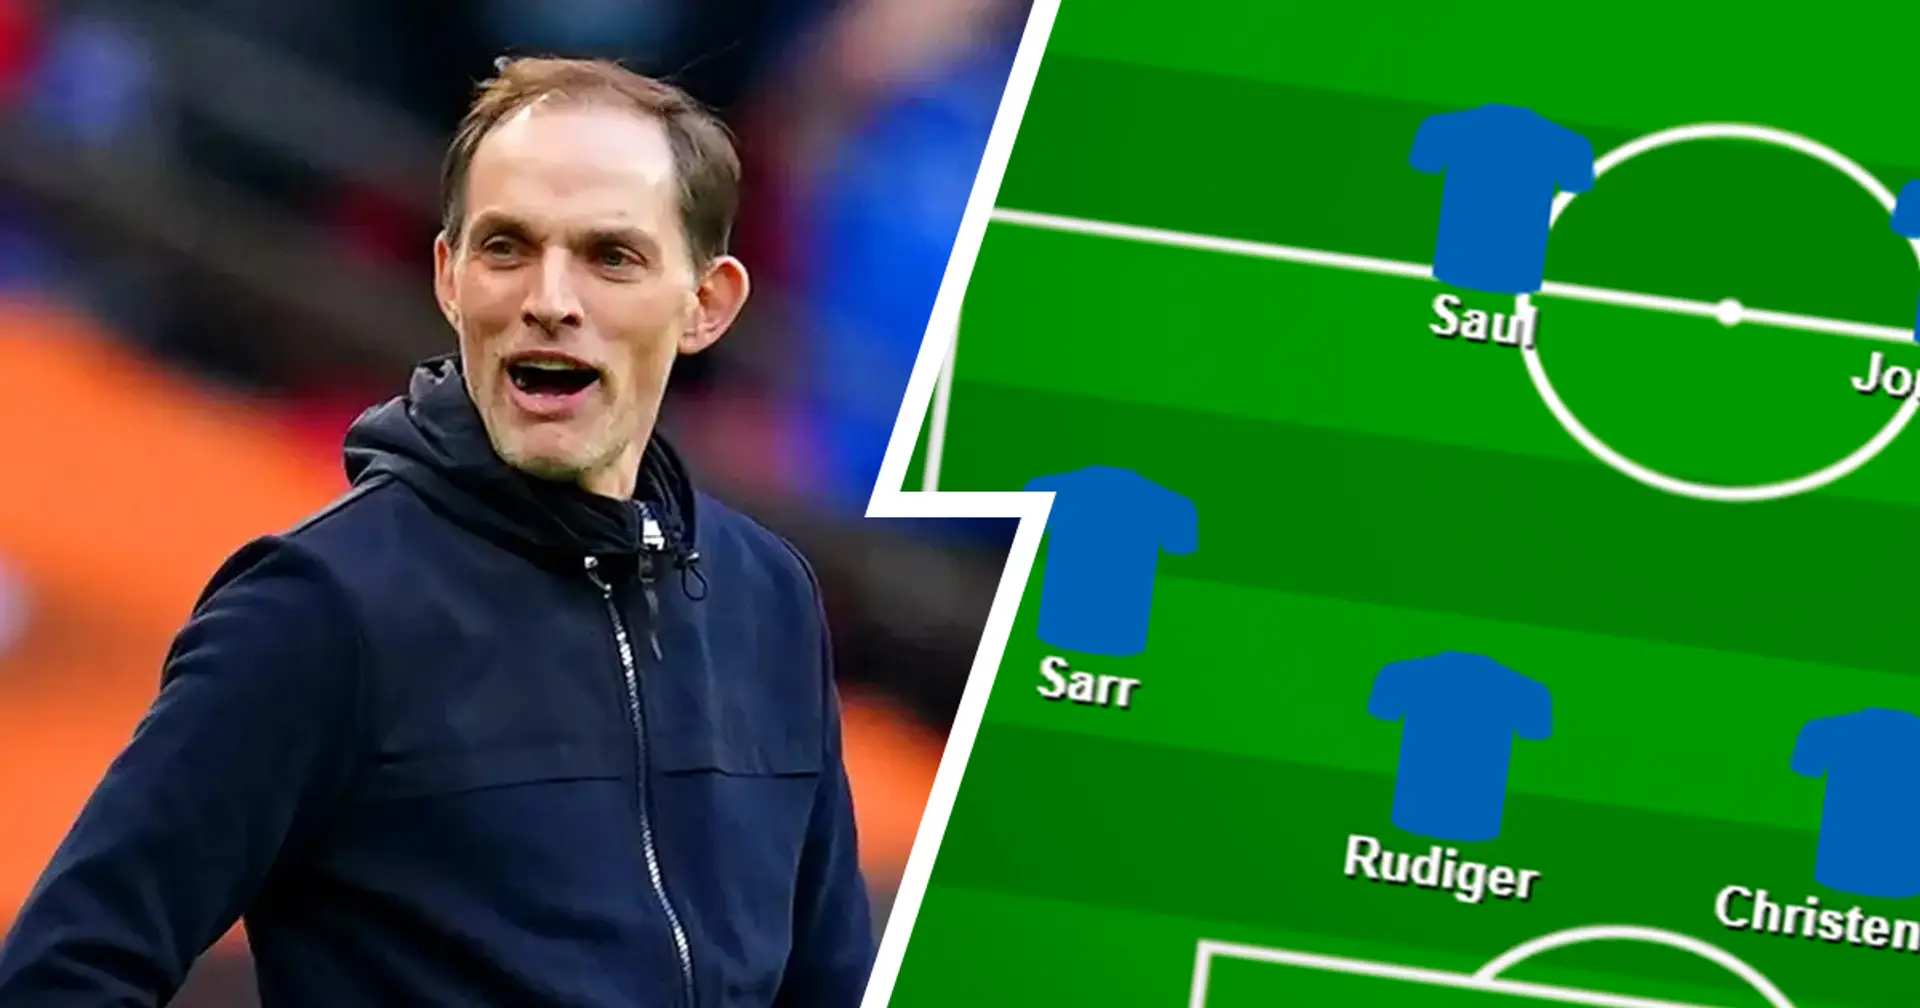 Return to back four? Select your preferred Chelsea XI vs Luton from 2 options